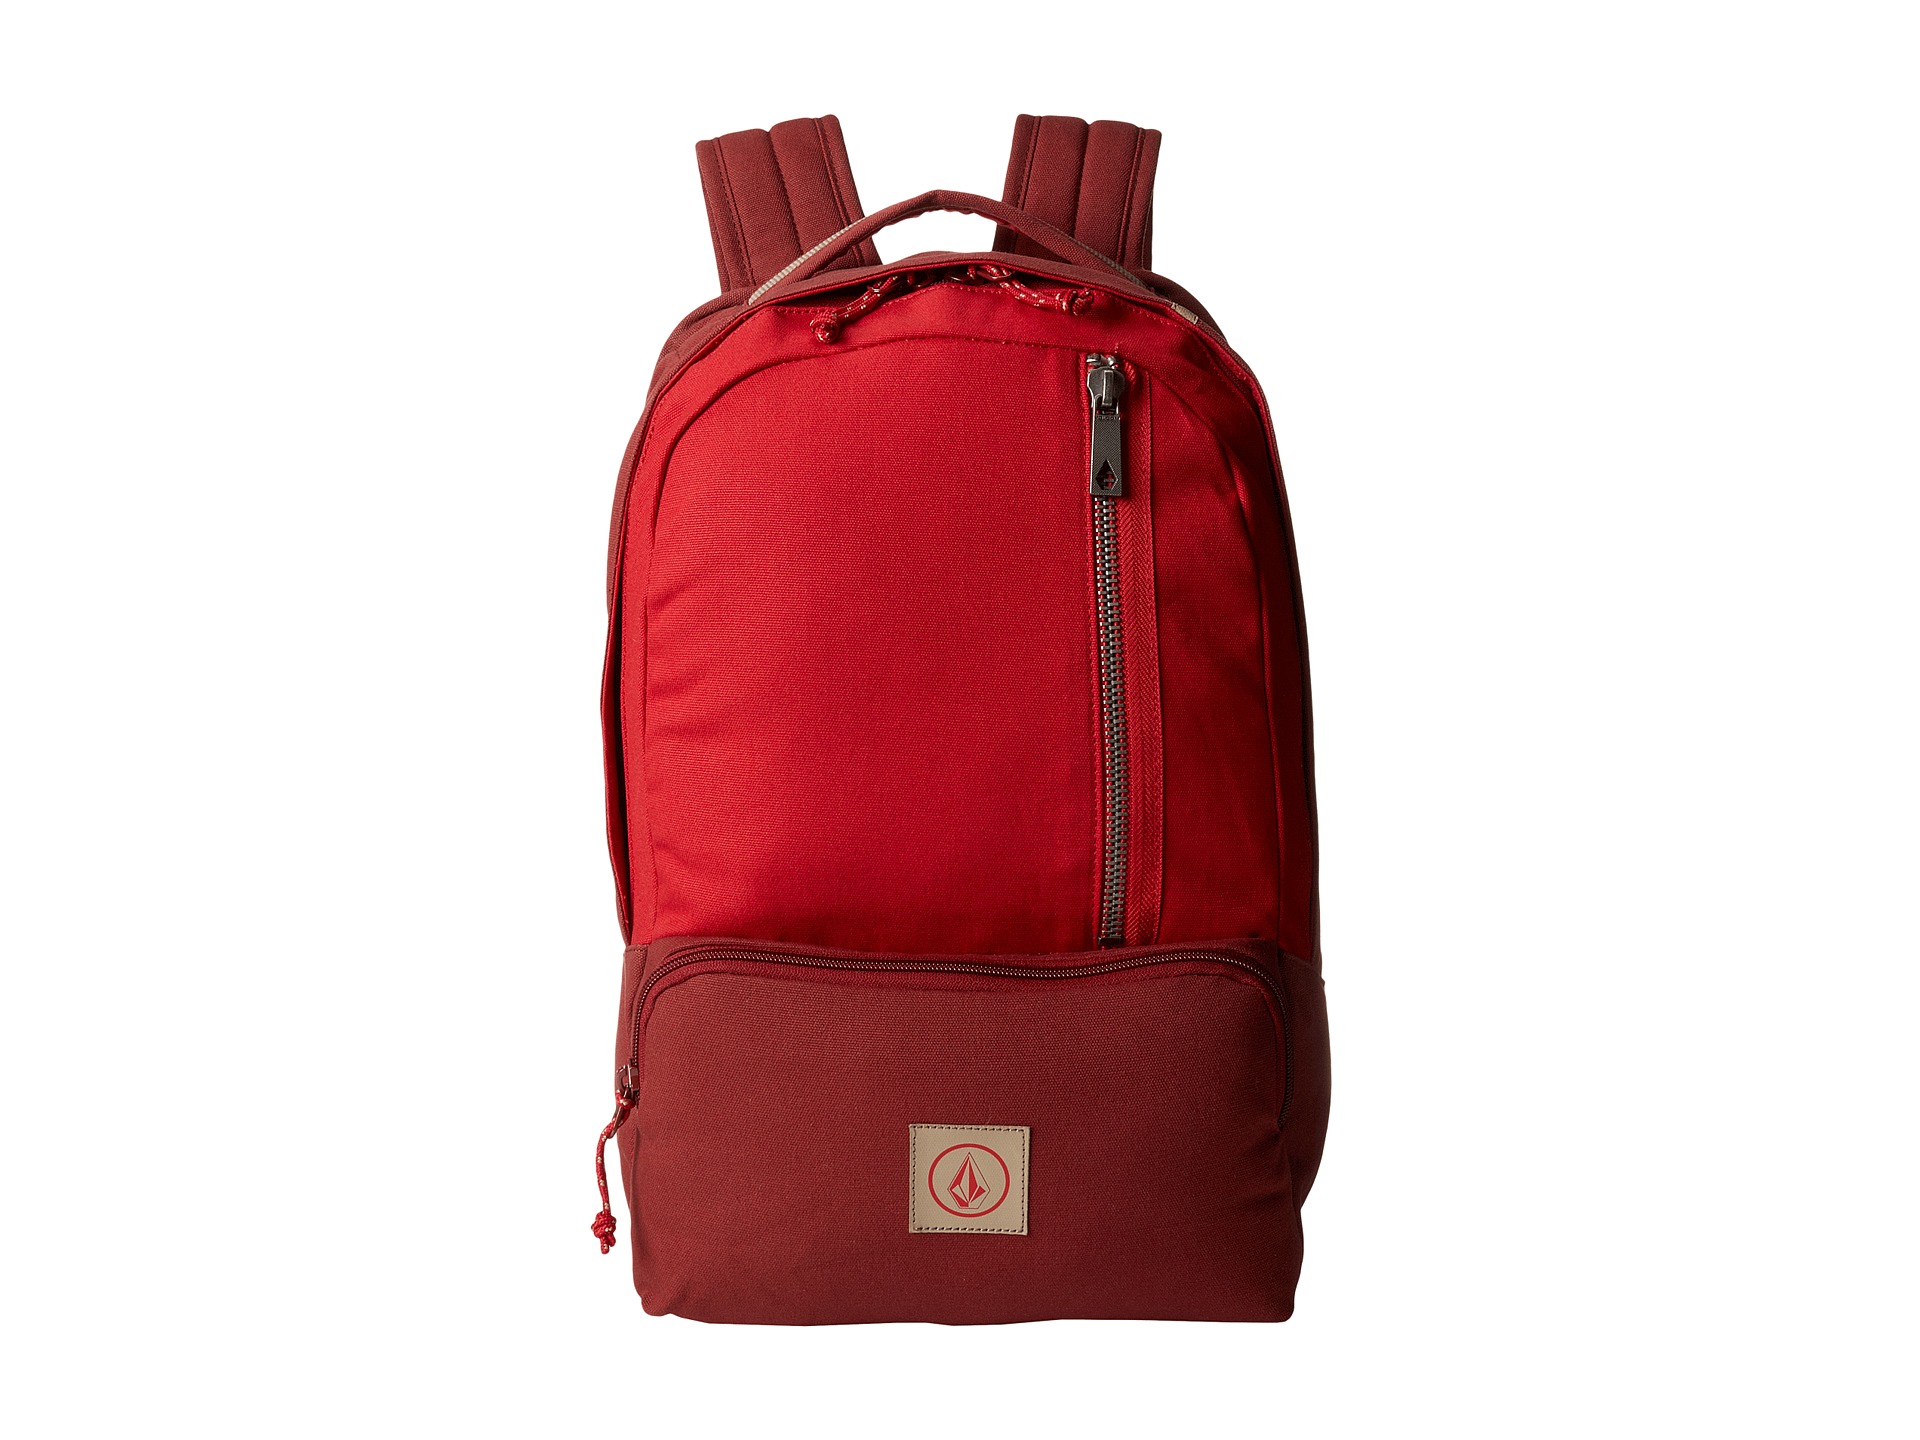 ... Basis Canvas Backpack Burgundy, Bags, Women | Shipped Free at Zappos